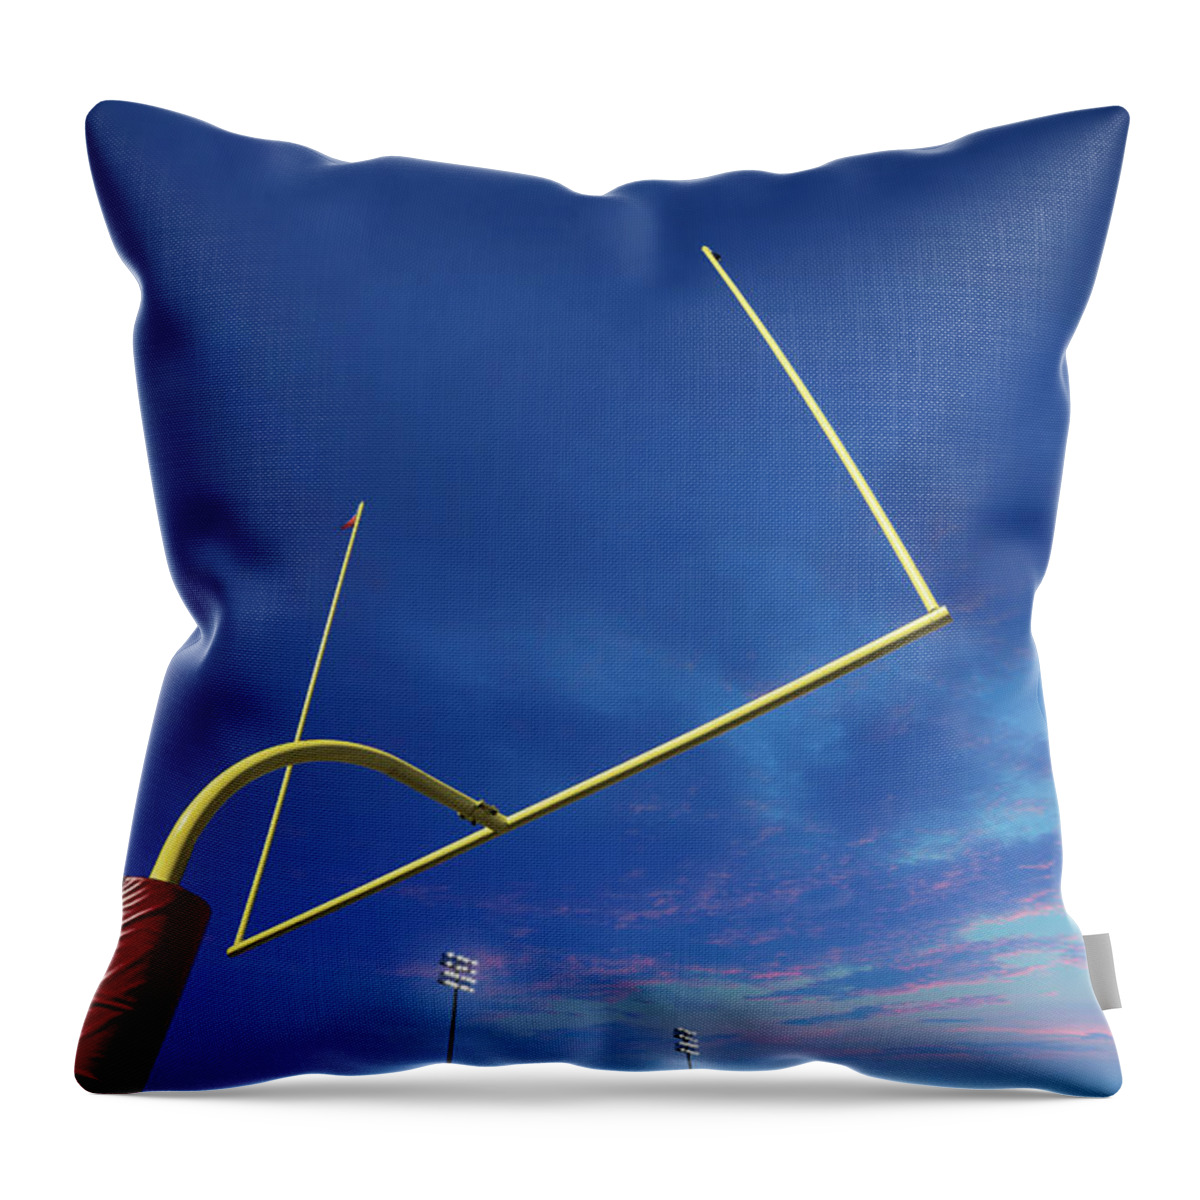 Goal Throw Pillow featuring the photograph American Football Goalpost At Sunset by David Madison